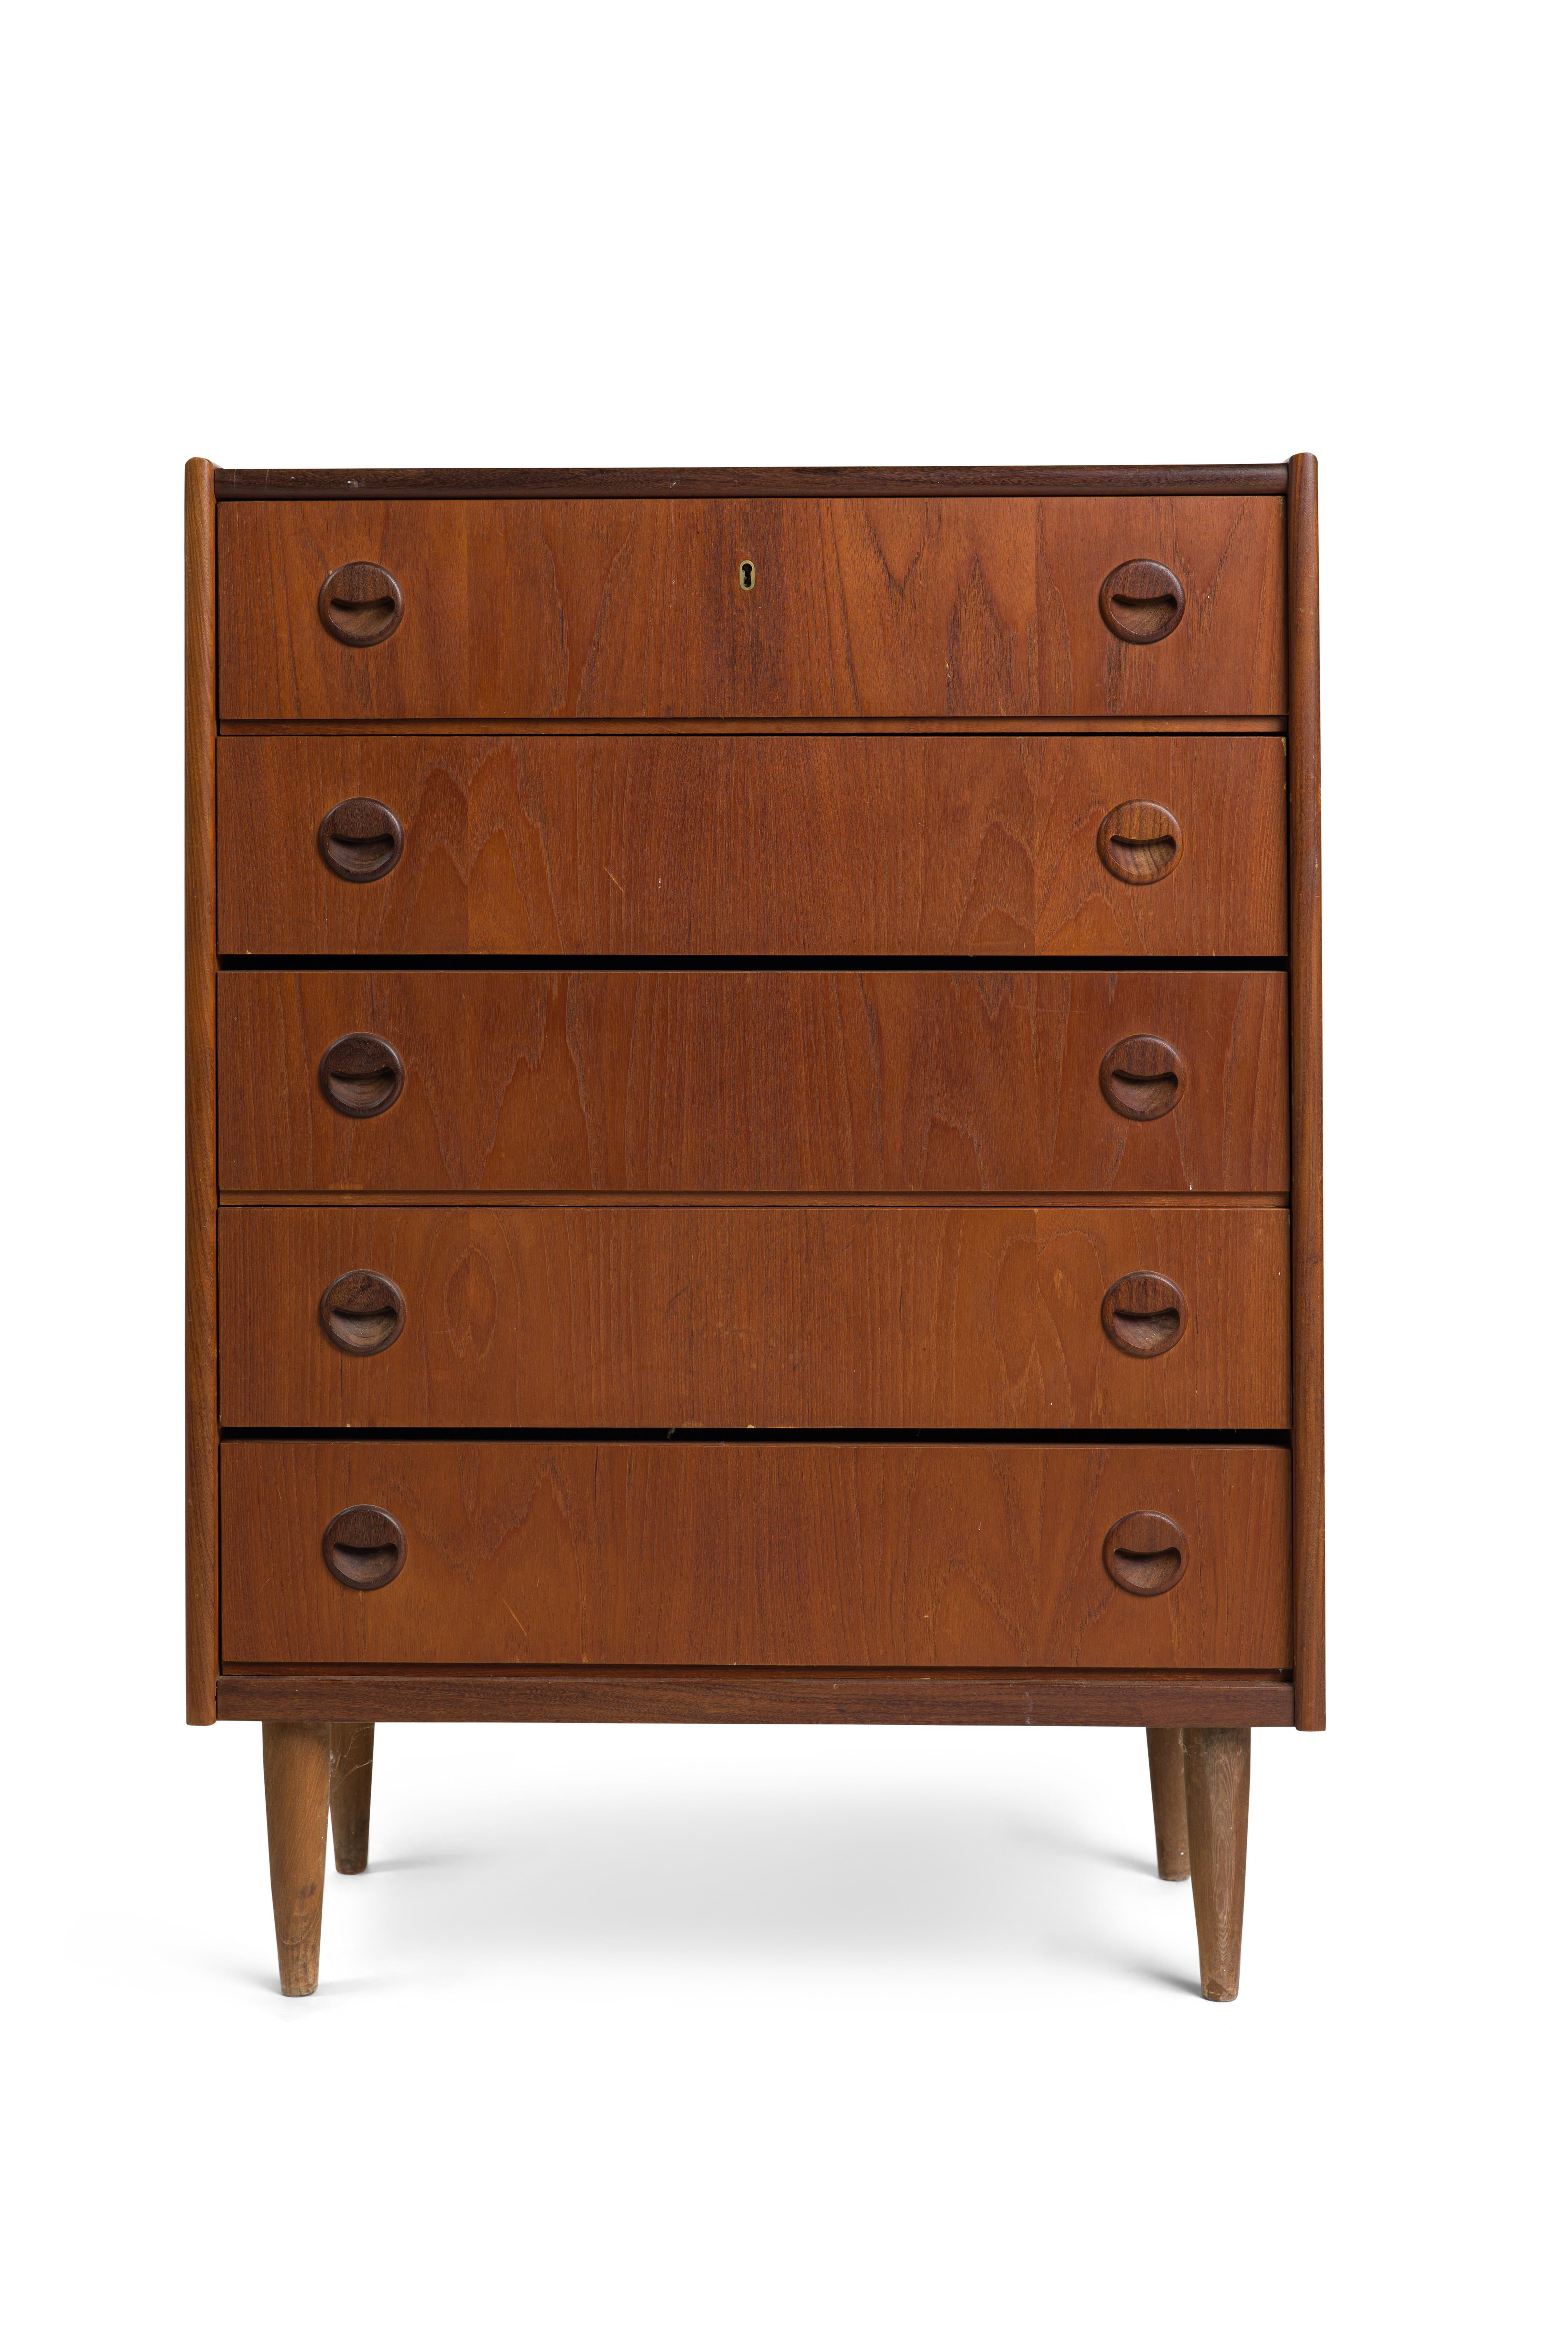 Rosewood sideboard, produced by Haslev furniture cabinet (Denmark).
H. 51 cm. L. 67 cm. B. 67 cm.
Teak wood chest of drawers, five drawers in the front. 
H. 103 cm. B. 75 cm. D. 40 cm.
      